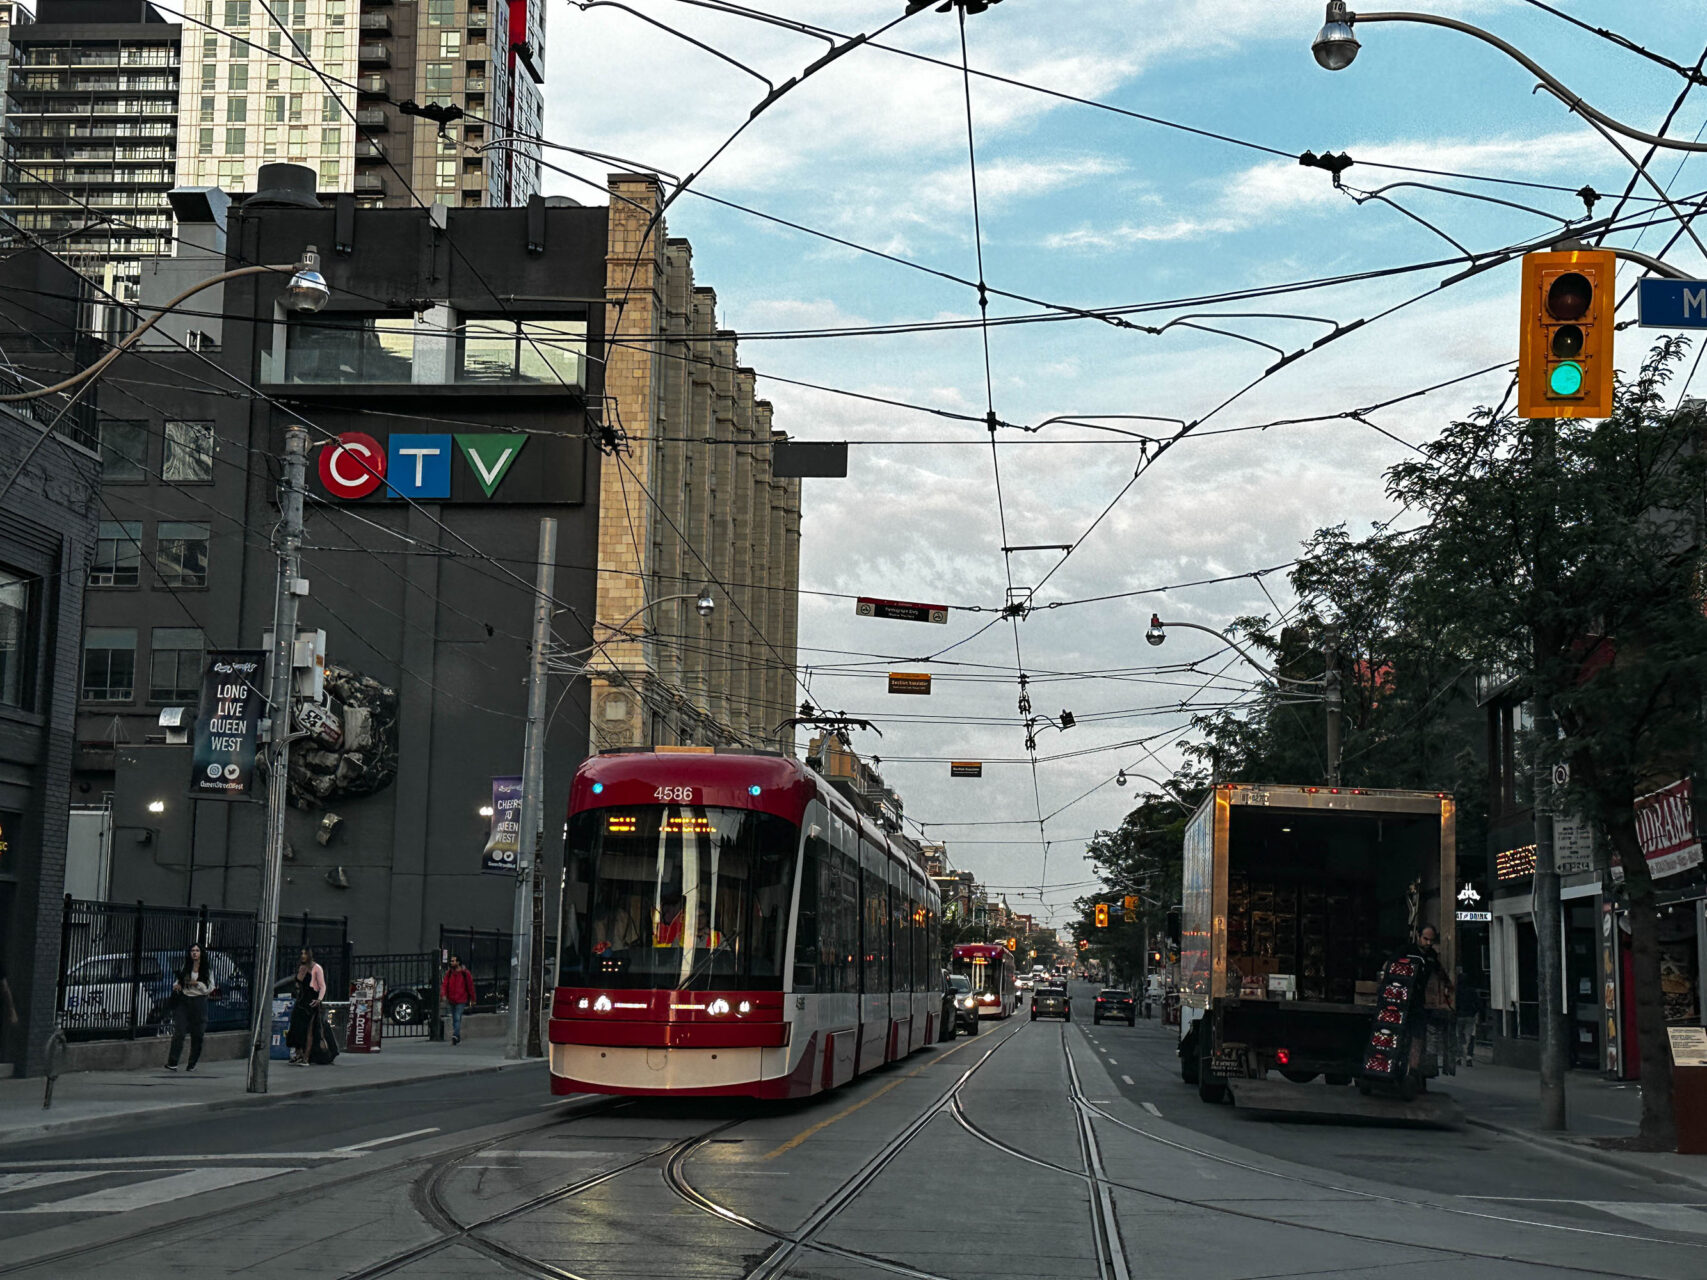 The Toronto Tram is a fantastic way to get around the city.